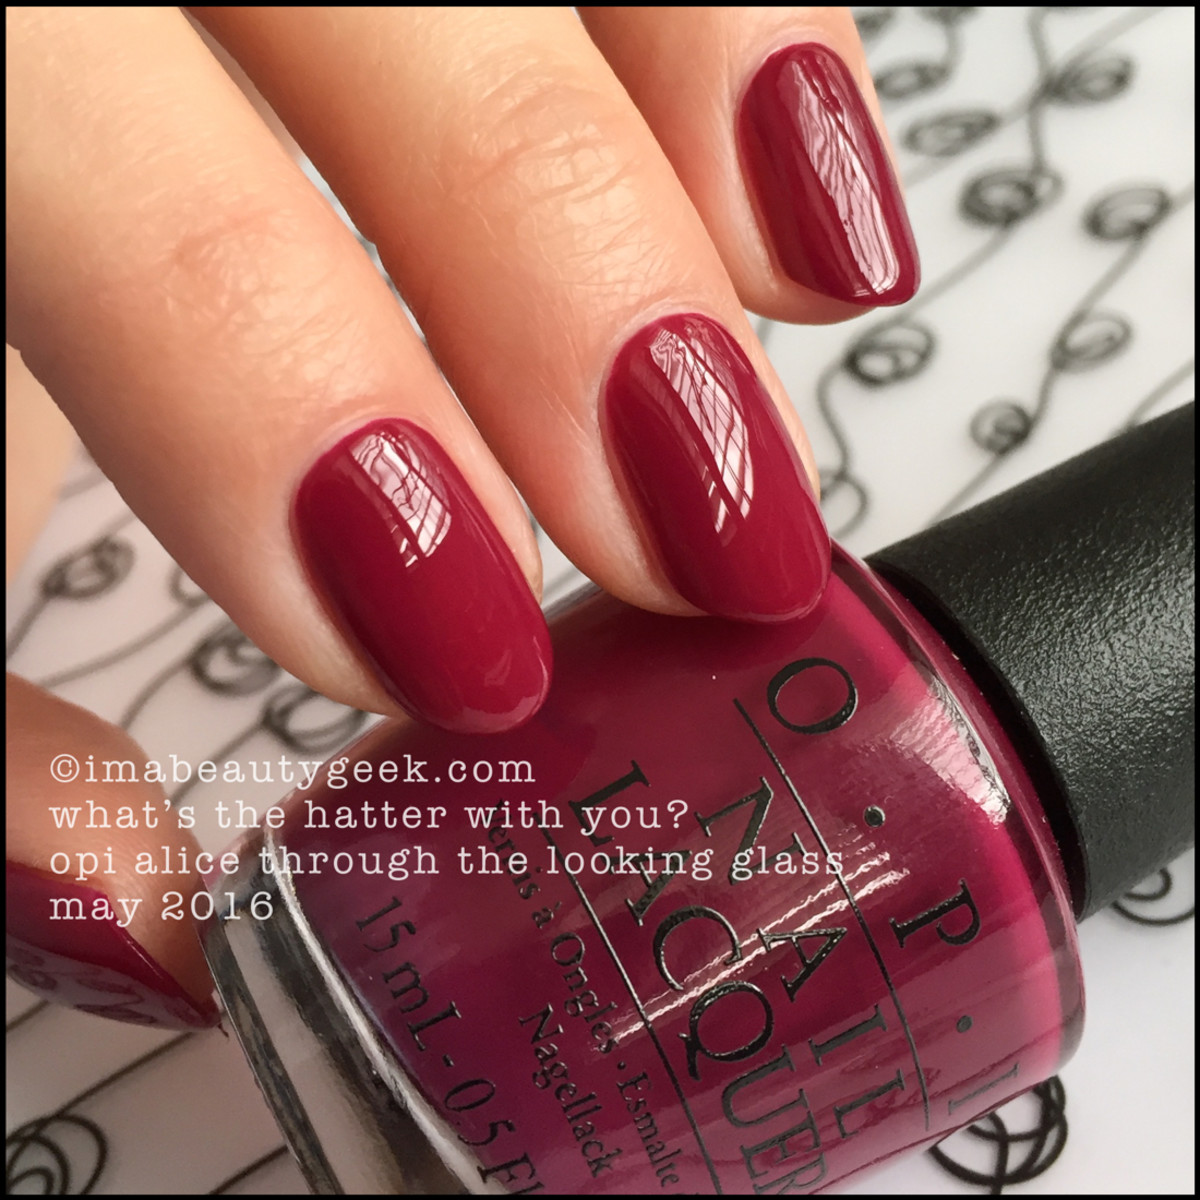 OPI Whats the Hatter With You_OPI Alice Through The Looking Glass 2016